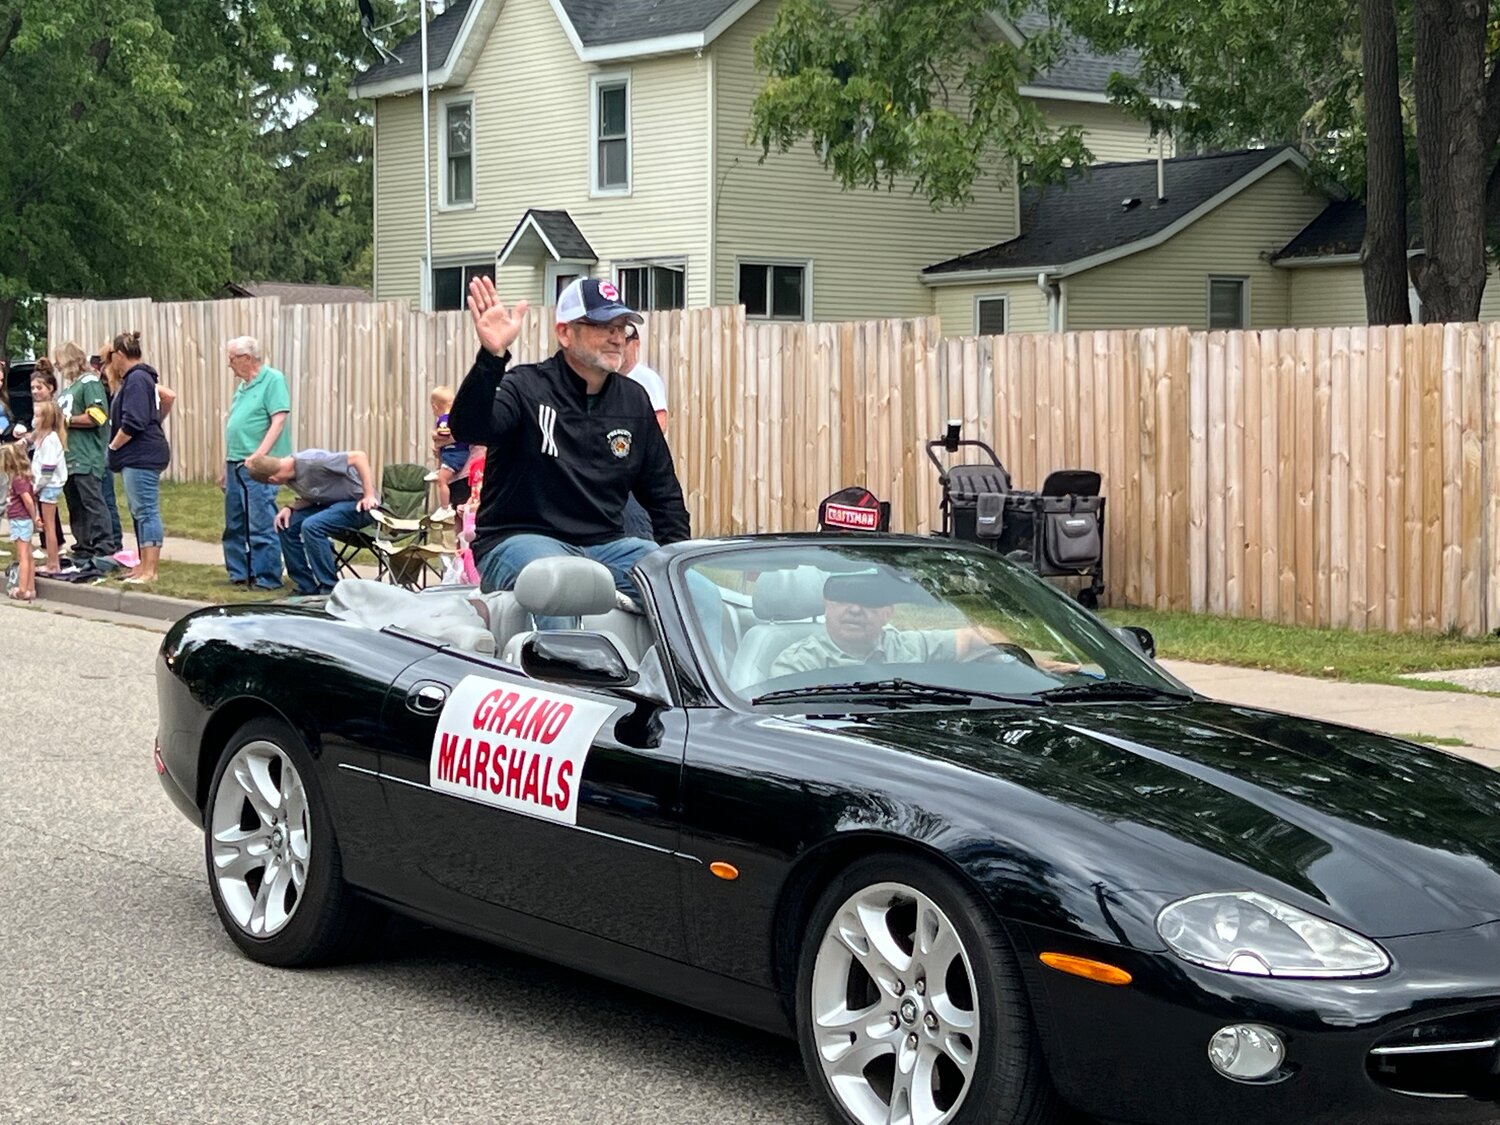 Prescott Daze Parade Grand Marshal was Tom Lytle. Lytle dedicated decades of his life to the Prescott Fire Department, retiring as chief last year.